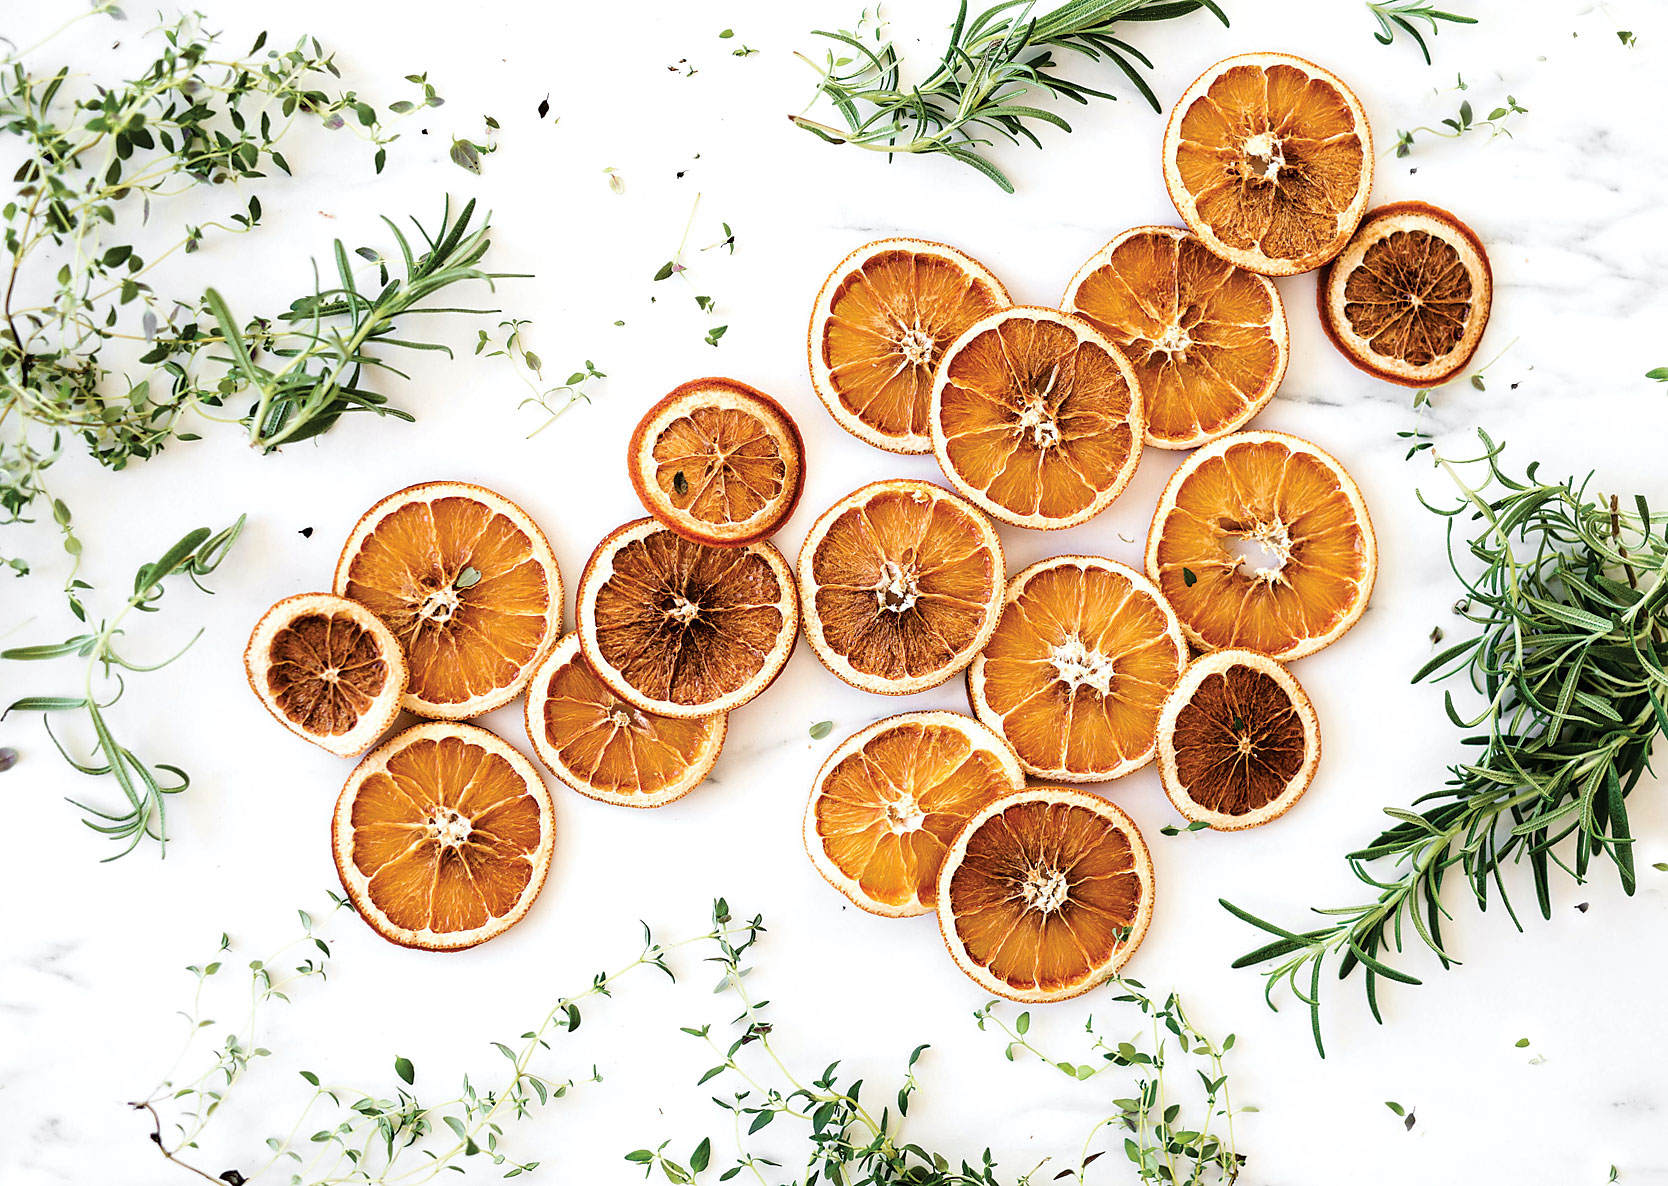 Dried orange slices and herbs spread on marble